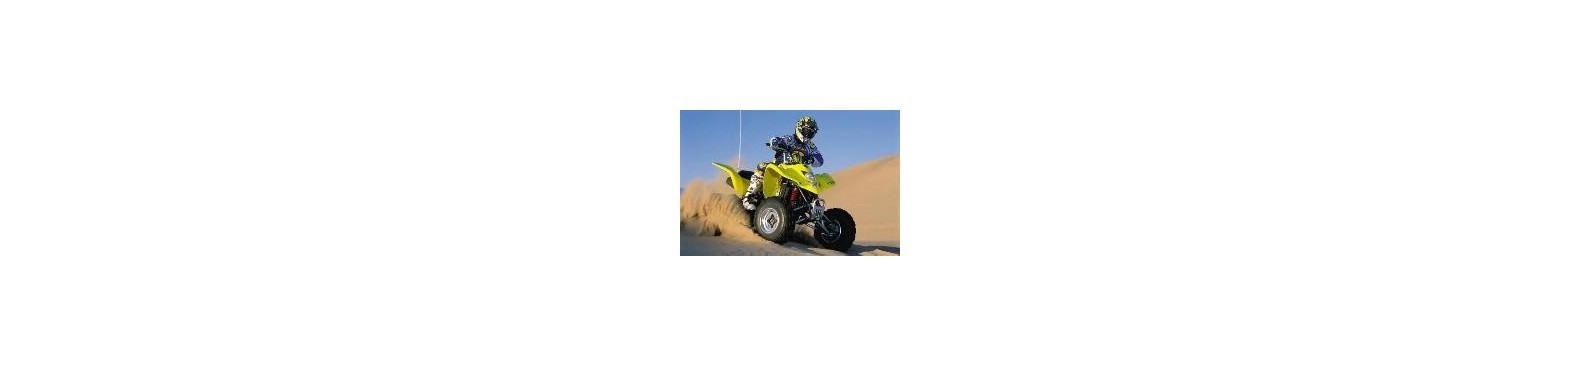 Parts and Performance for Suzuki ATVs  